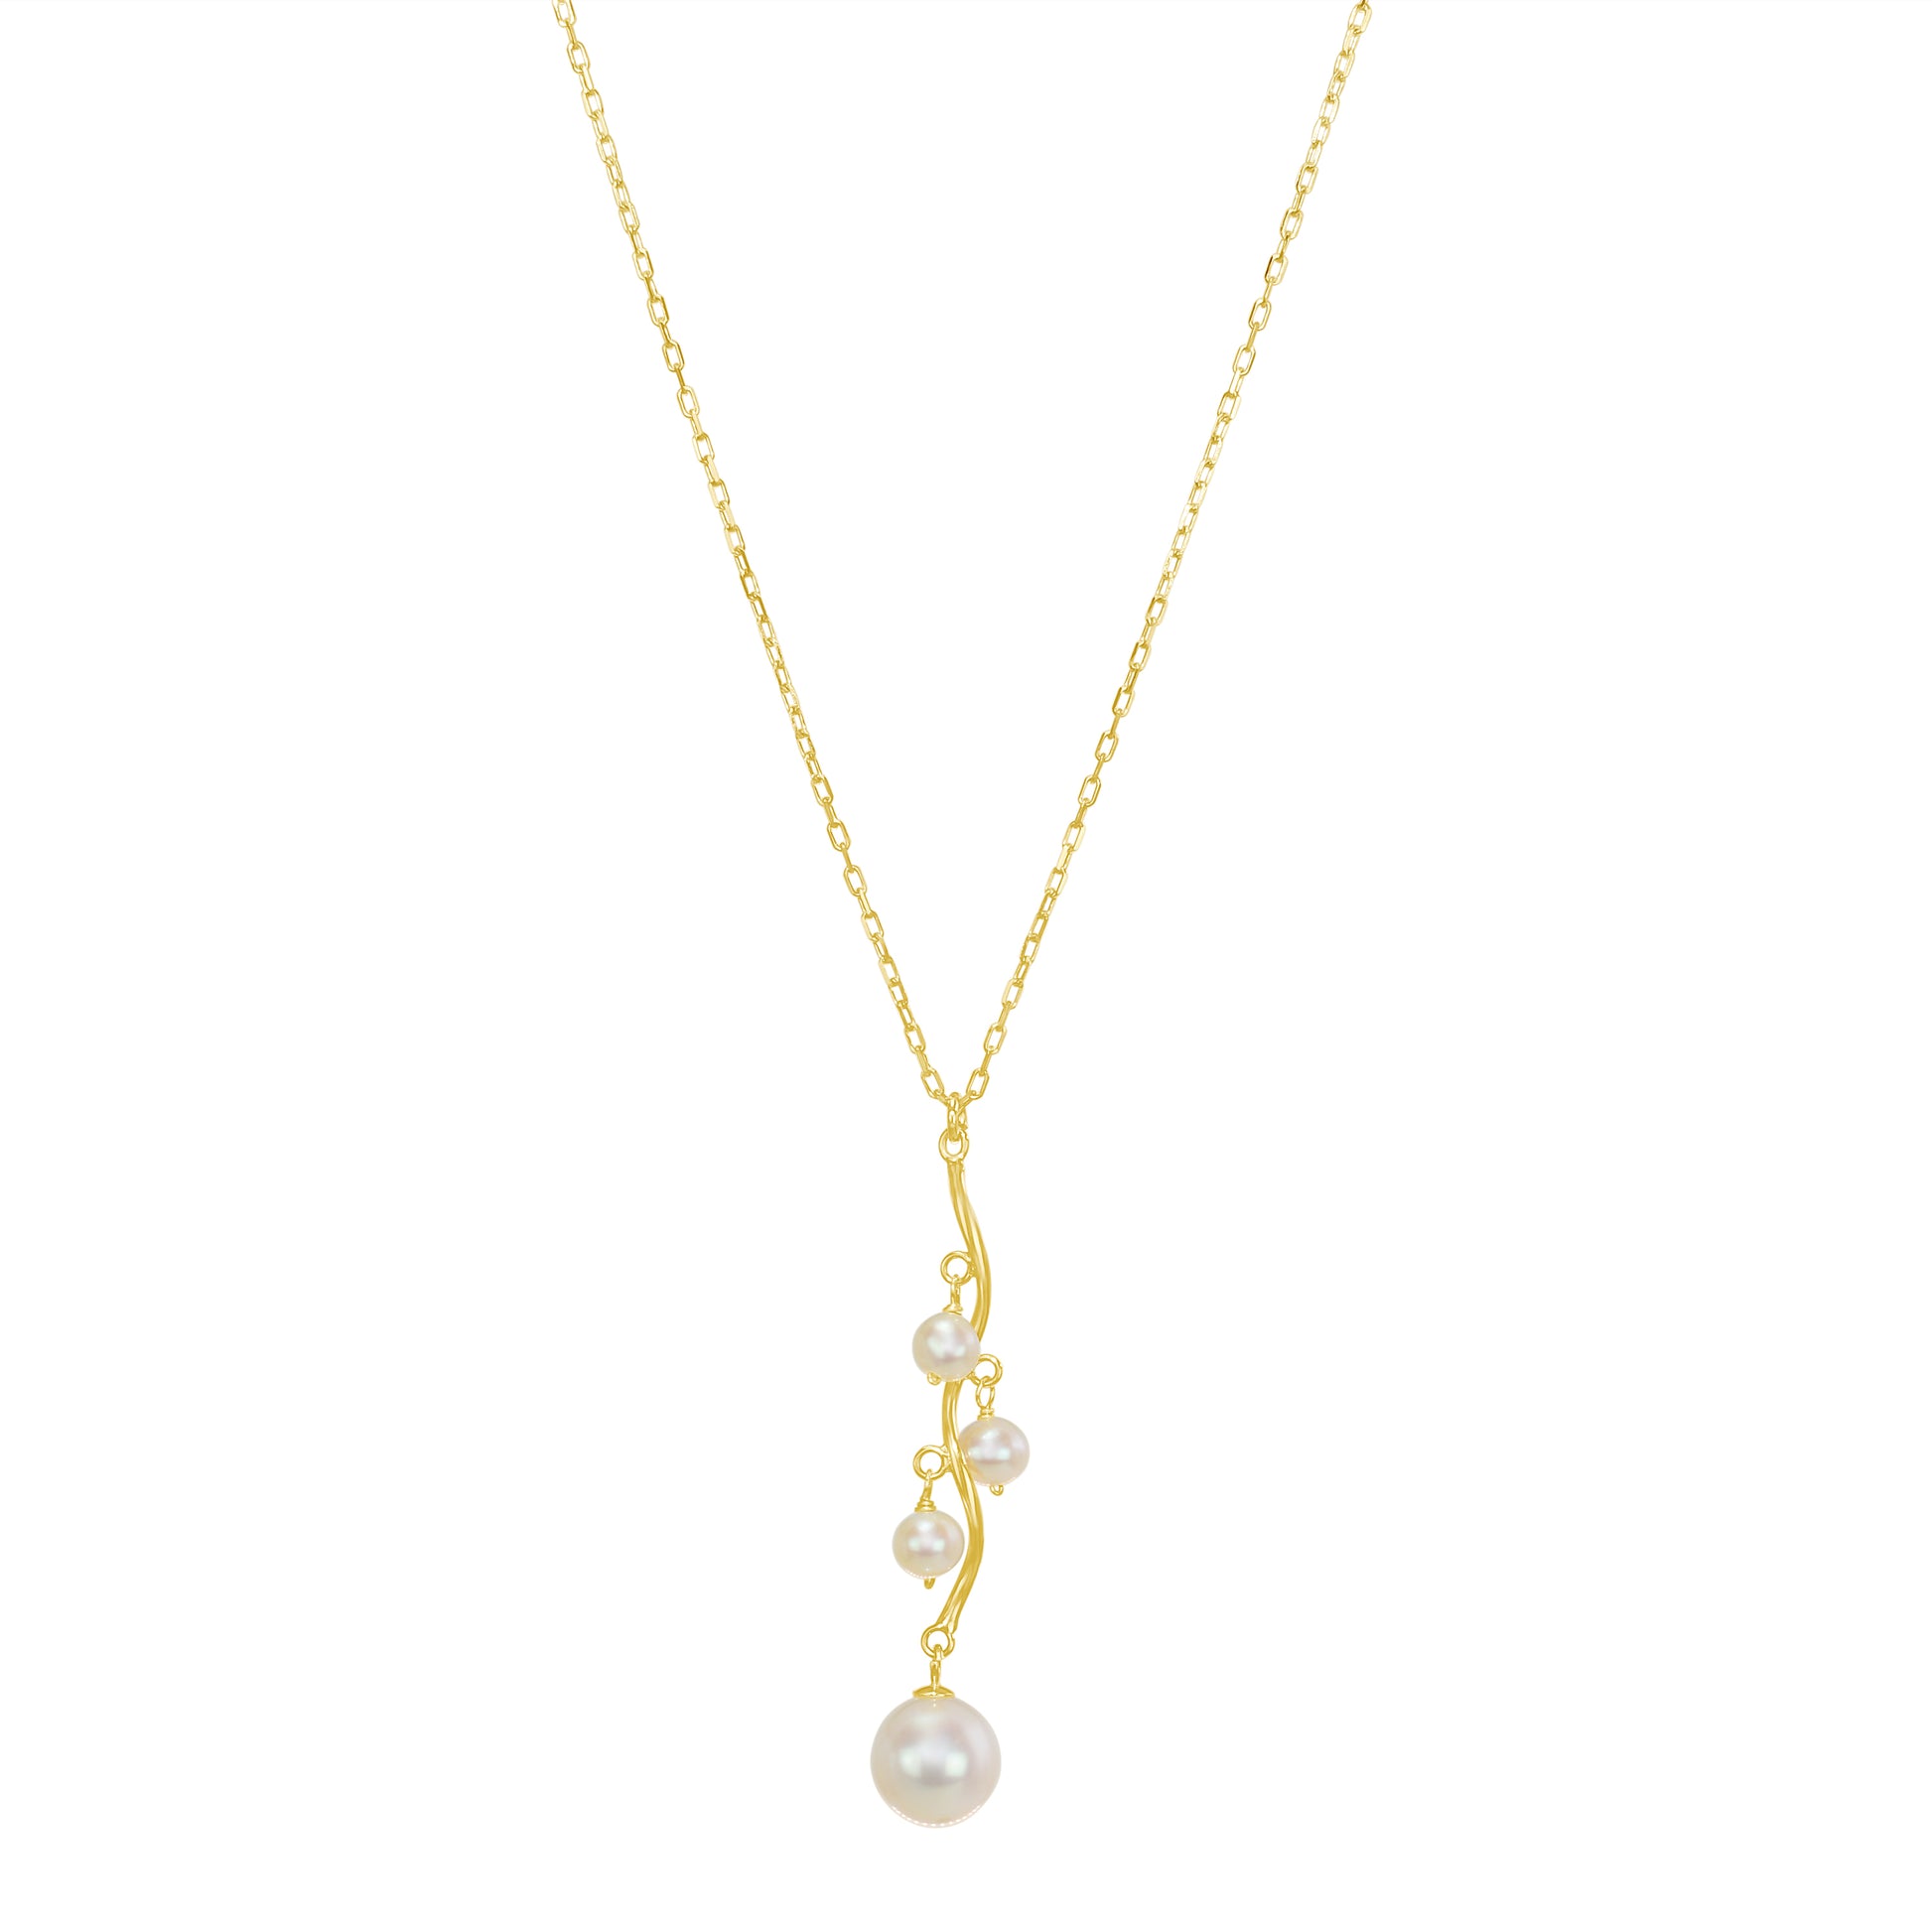 14k White Freshwater Pearl Wavy Drop Pendant Necklace 17"